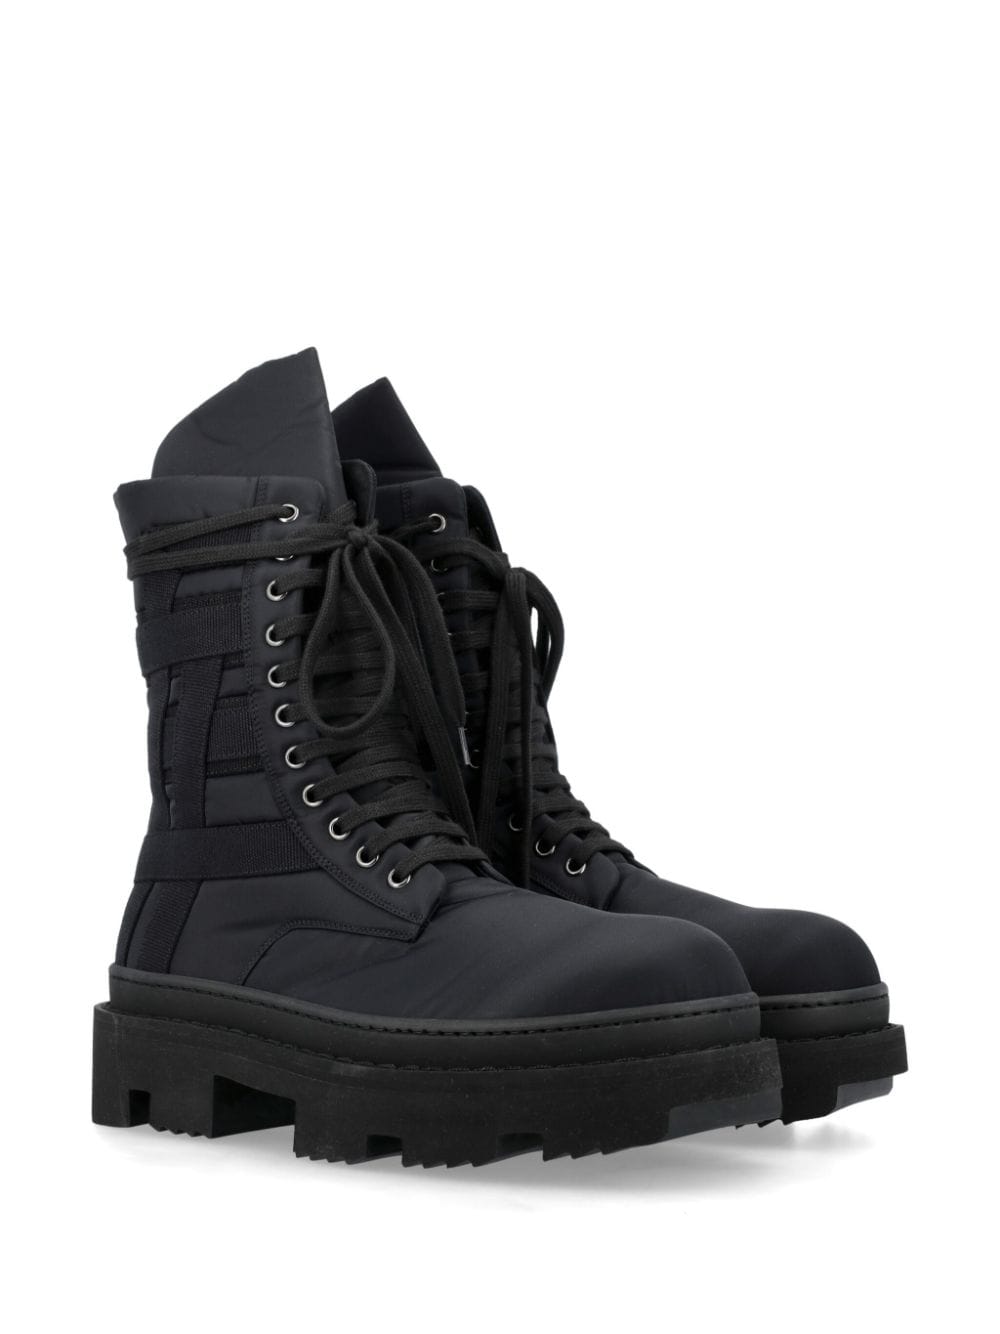 Image 2 of Rick Owens DRKSHDW Army Megatooth lace-up boots